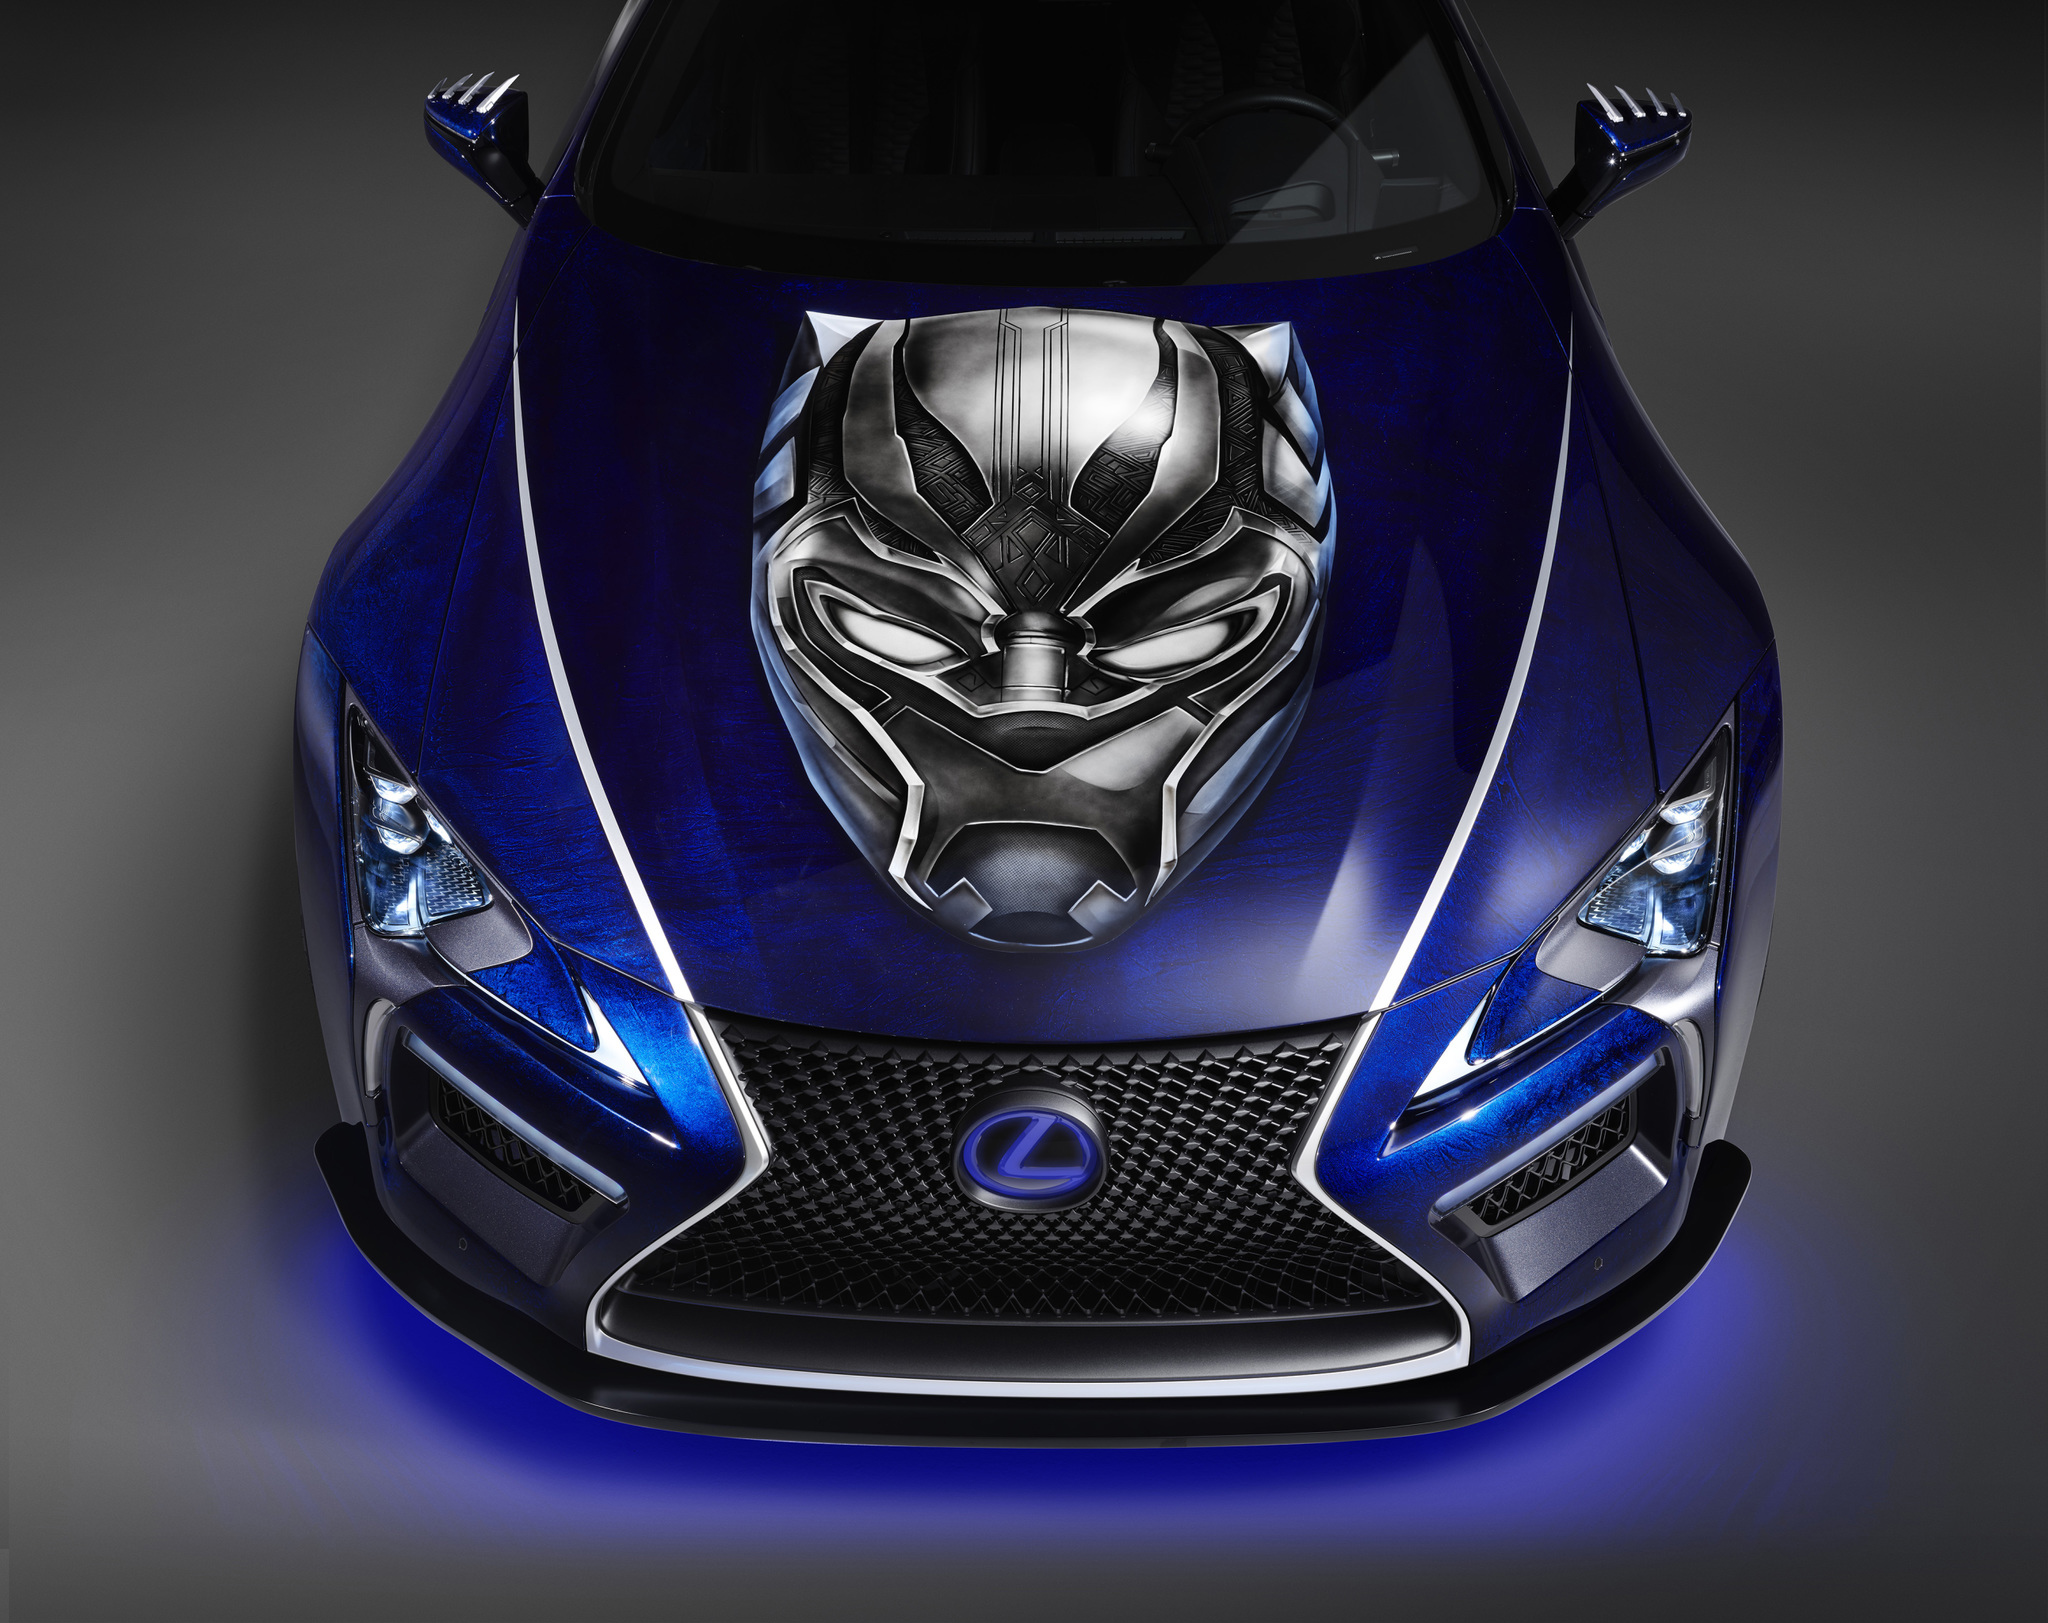 Lexus Introduces Two New Vehicles Inspired by Marvel Studios’ “Black Panther” Ahead of SEMA 2017